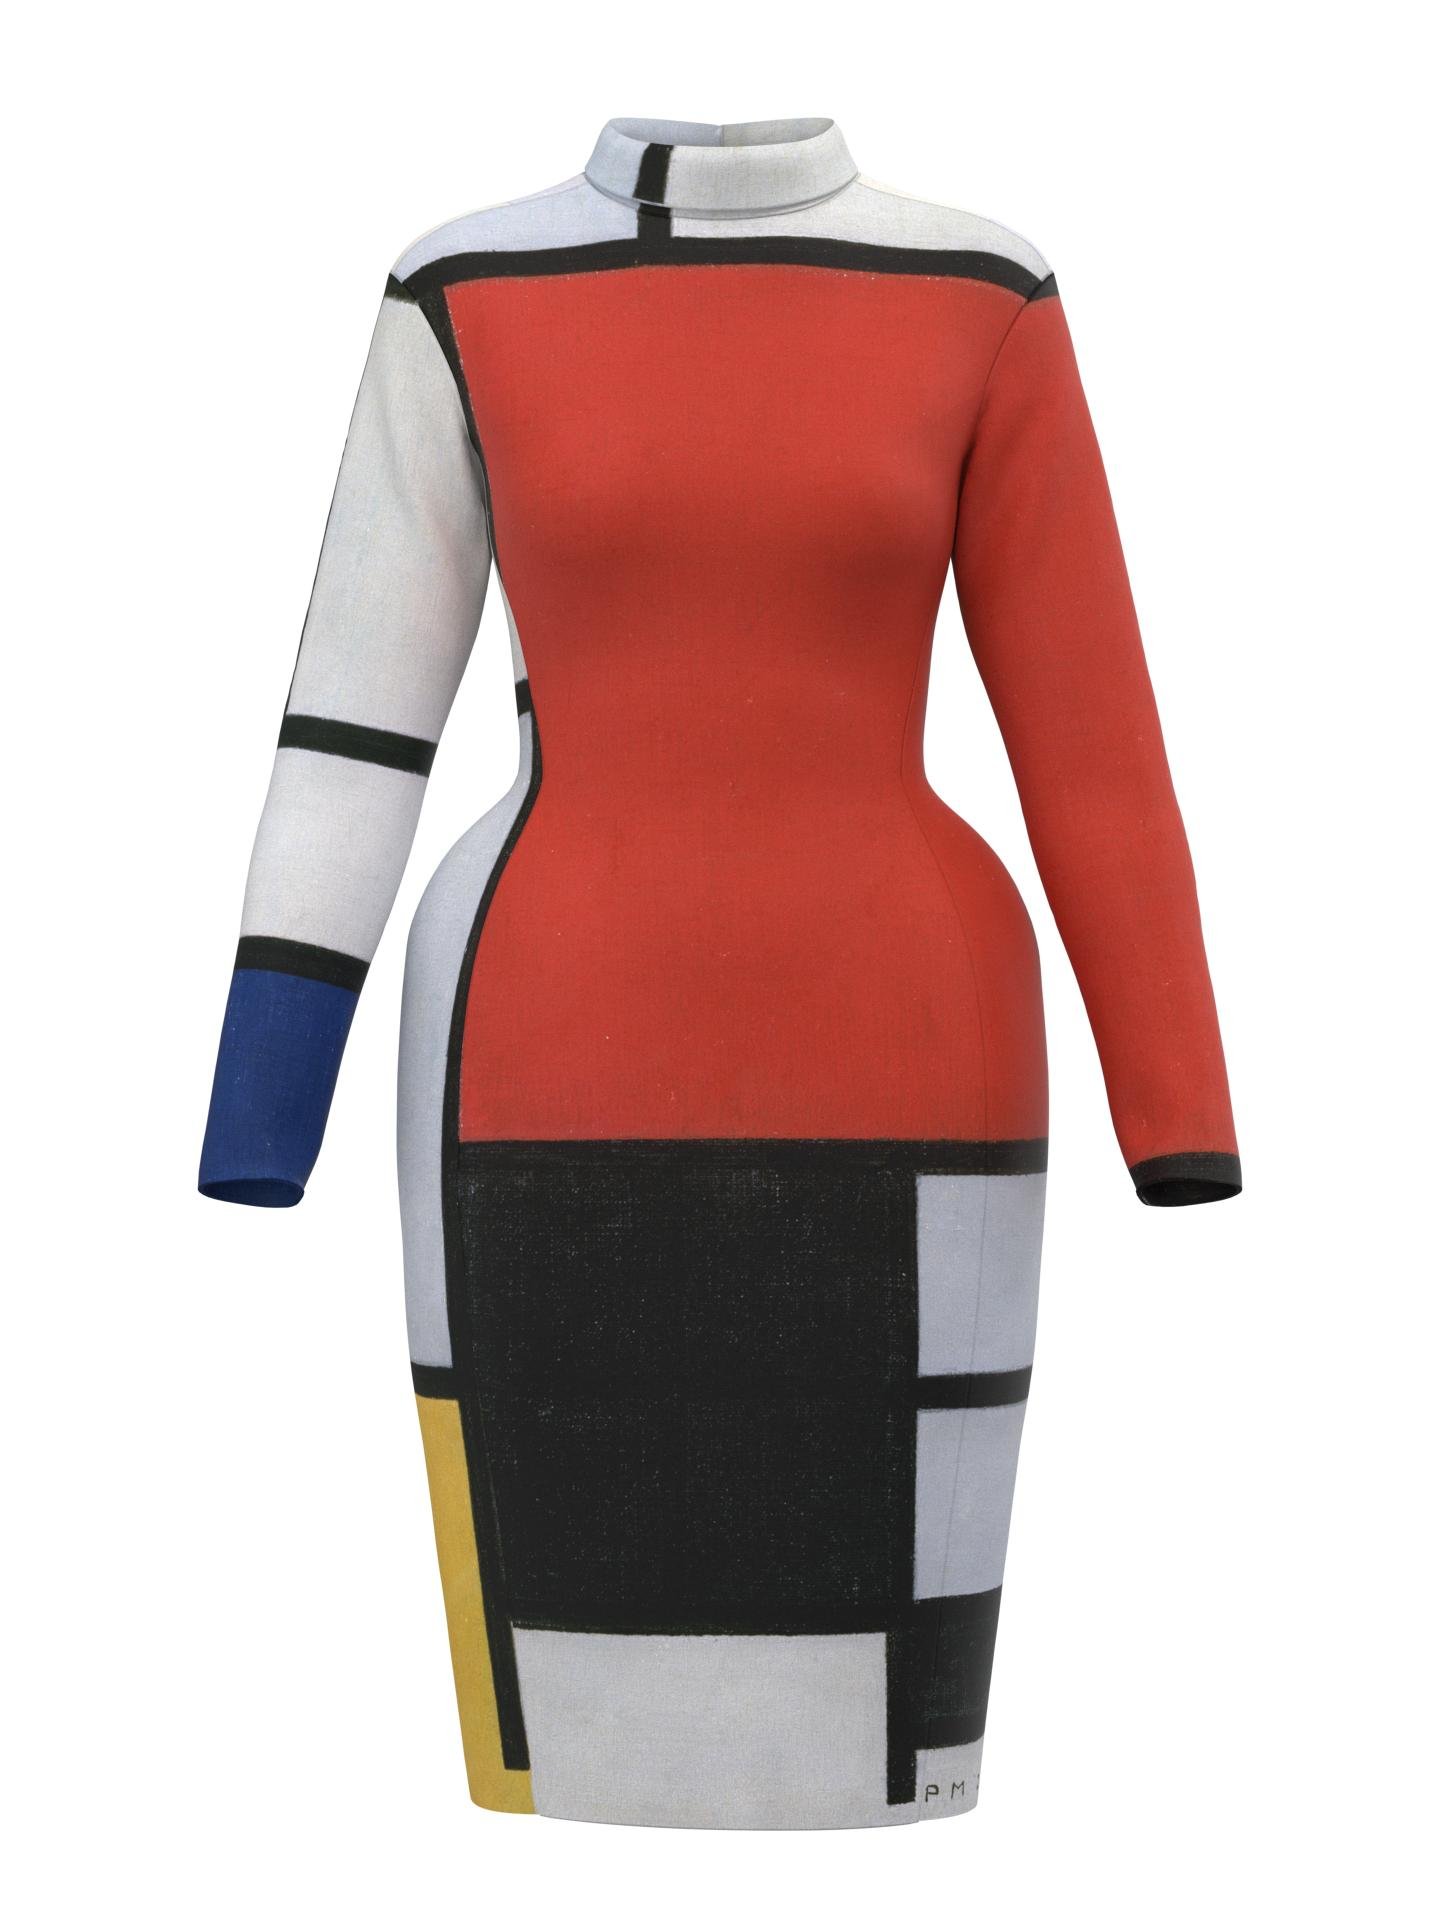 Space Dress-Composition with Red, Yellow, Blue and Black by DRESSX